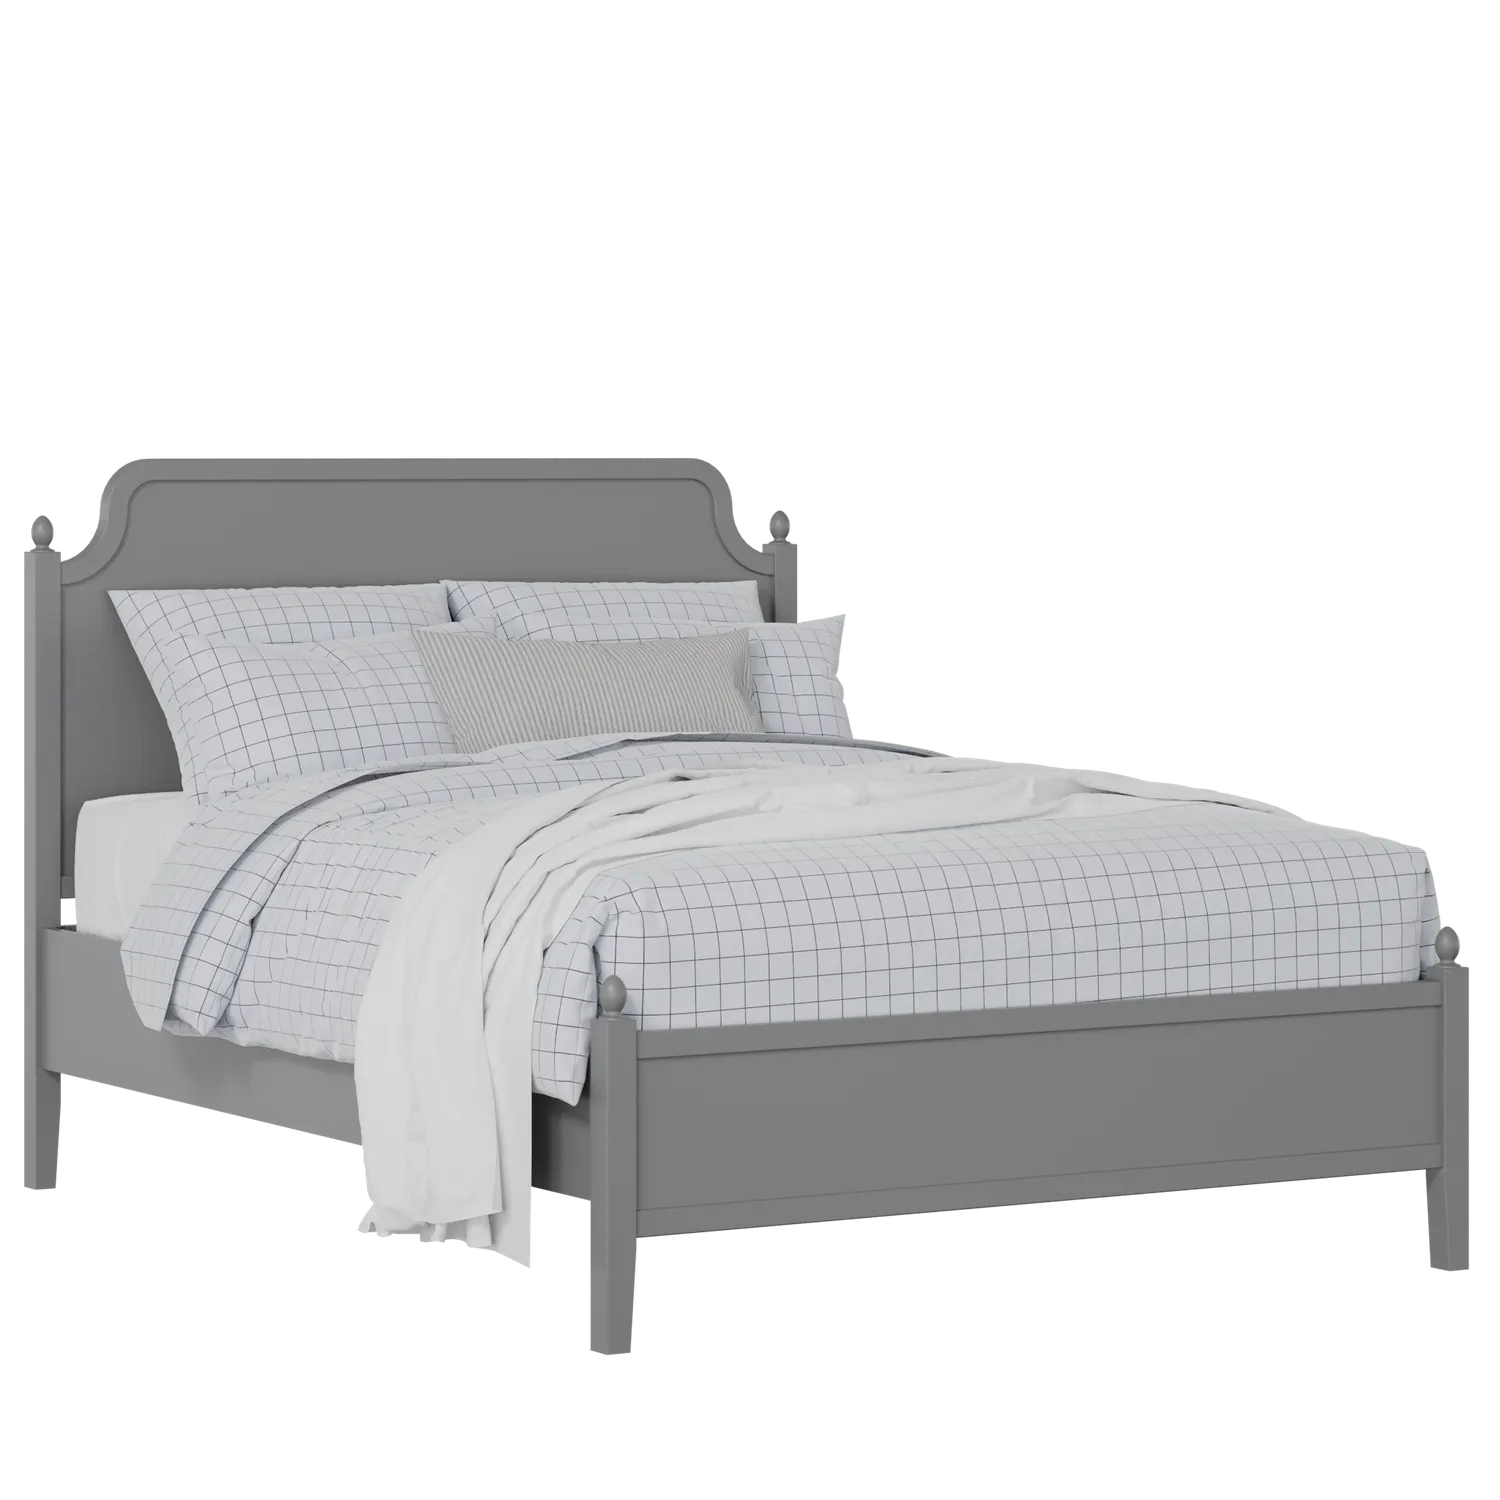 Bronte Slim painted wood bed in grey with Juno mattress